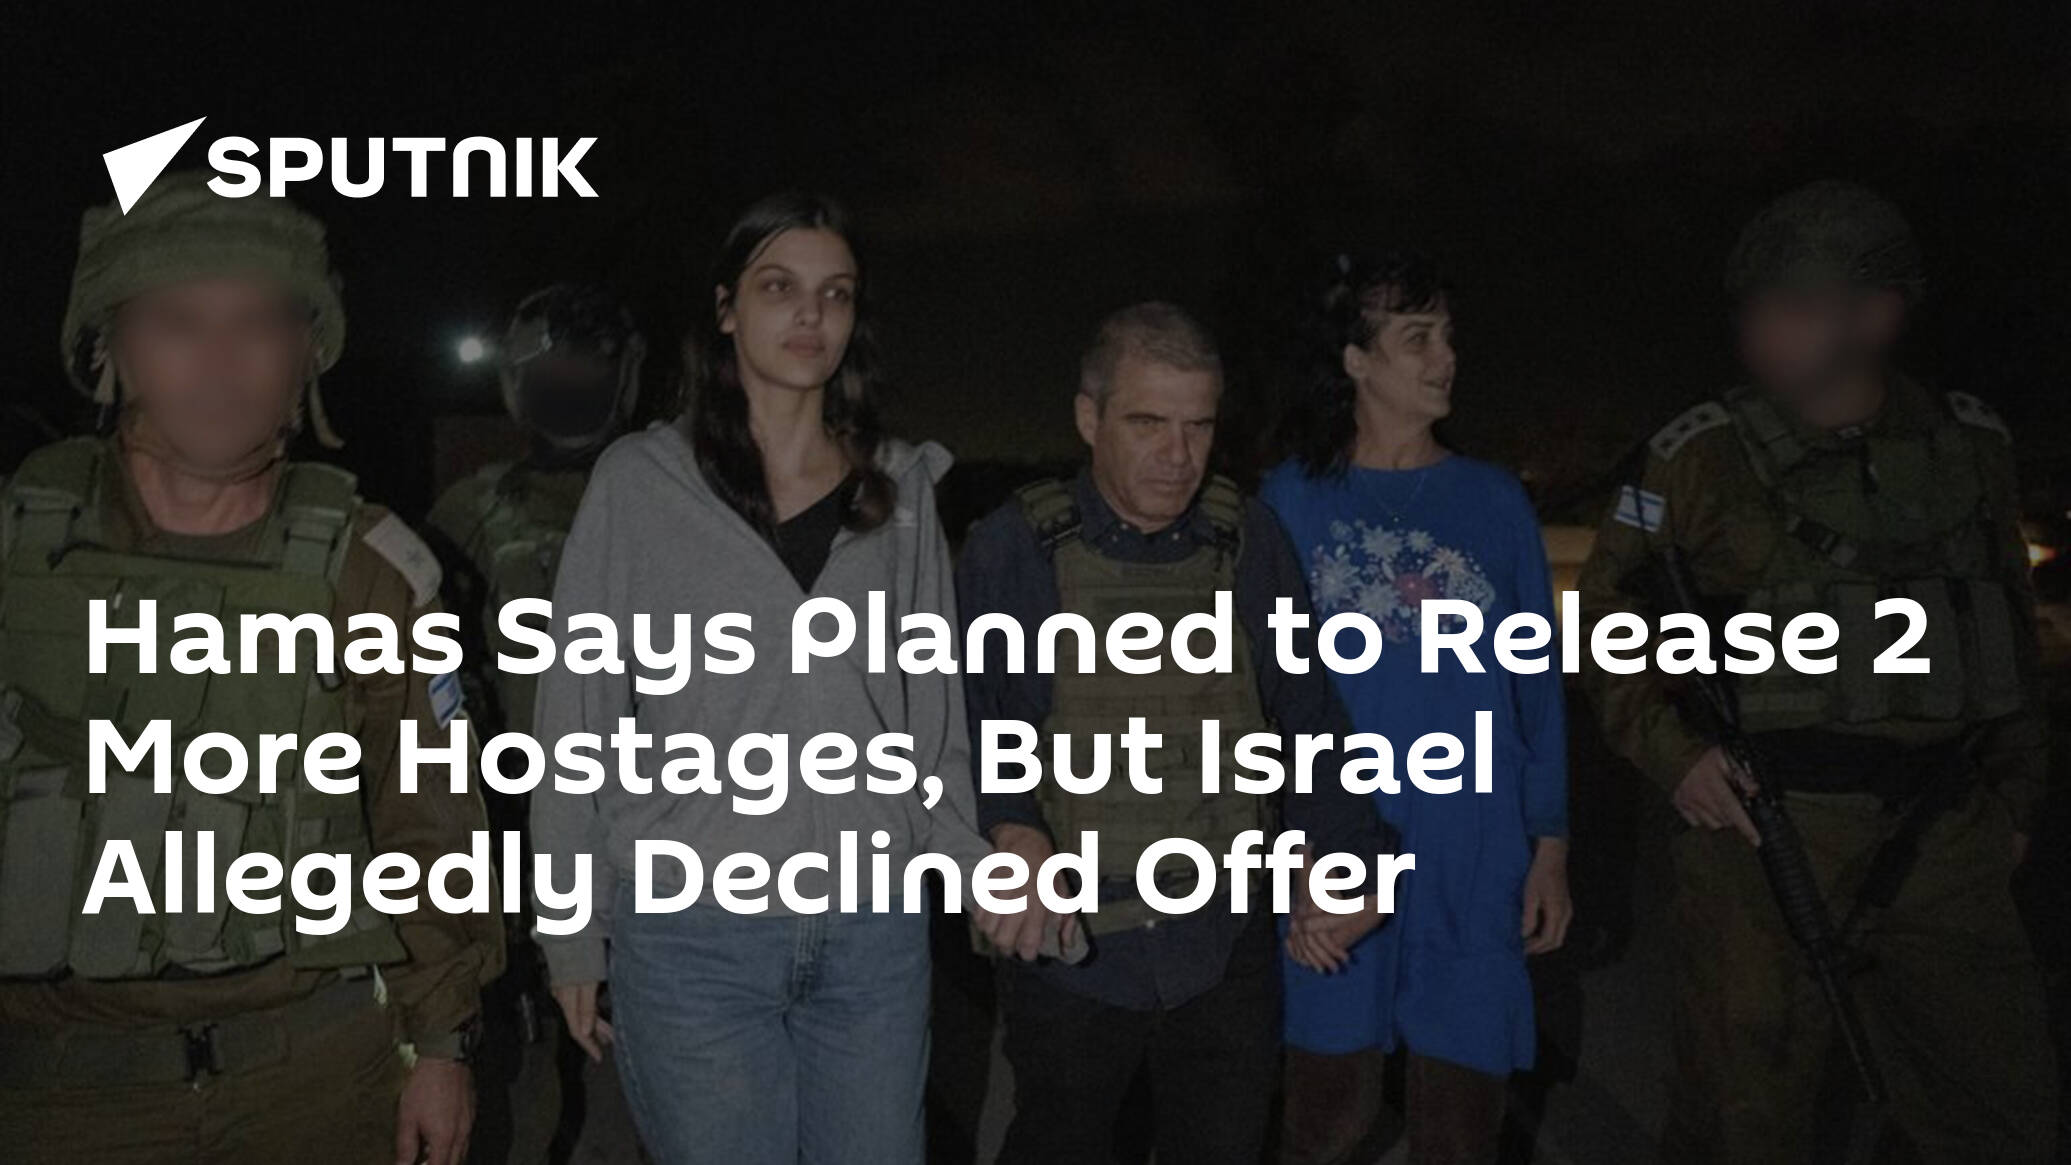 Hamas Says Planned to Release 2 More Hostages, But Israel Allegedly Declined Offer